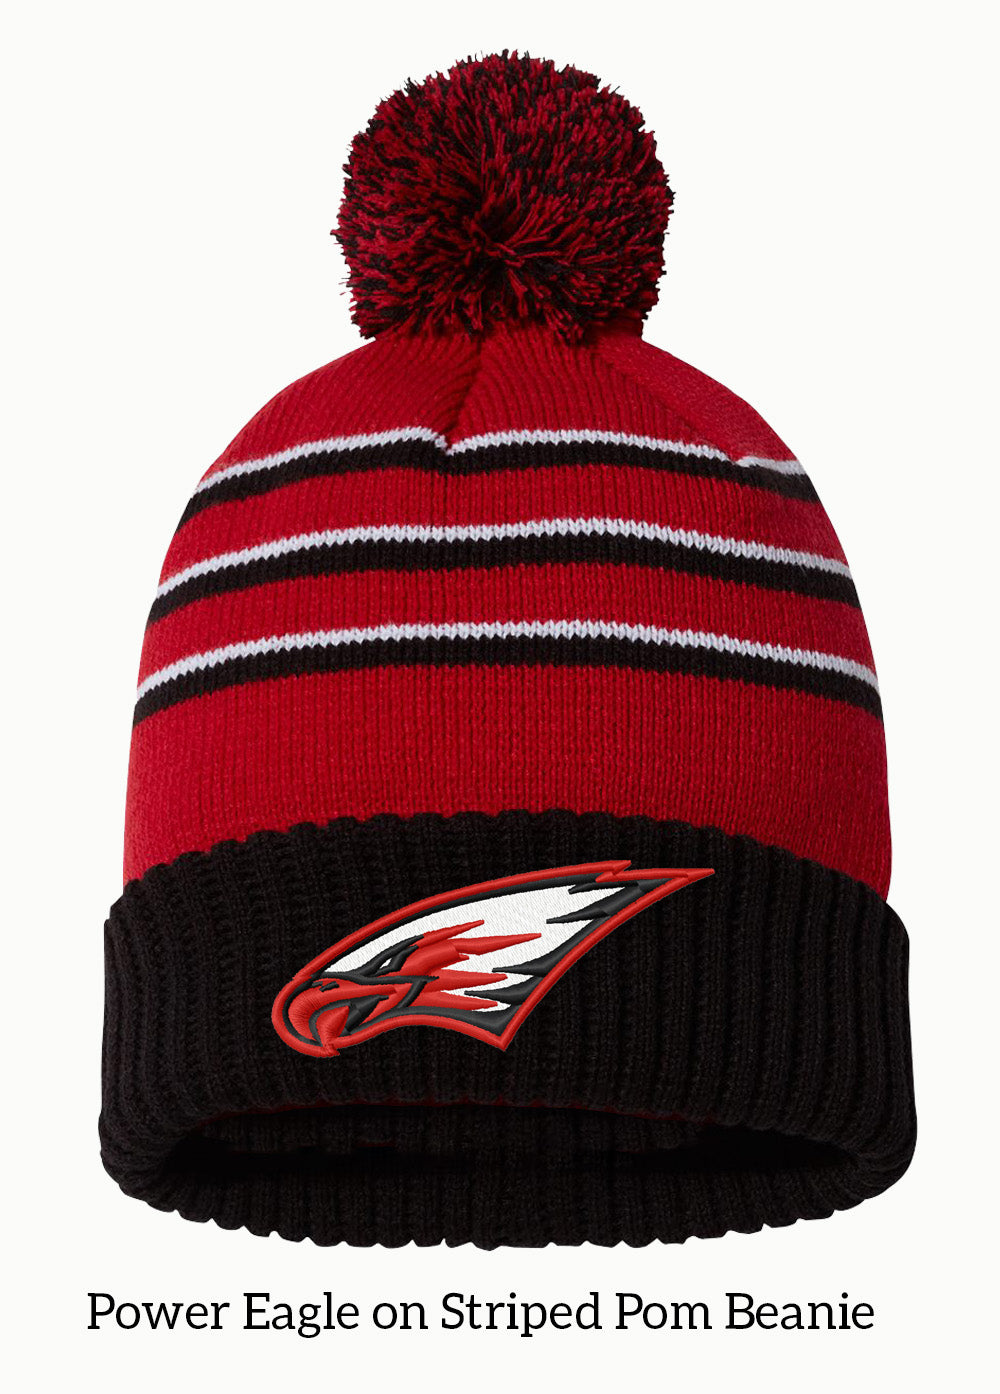 MMS PTO-Eagles or Power Eagle Embroidered Striped Pom Beanie (2 Design Options)